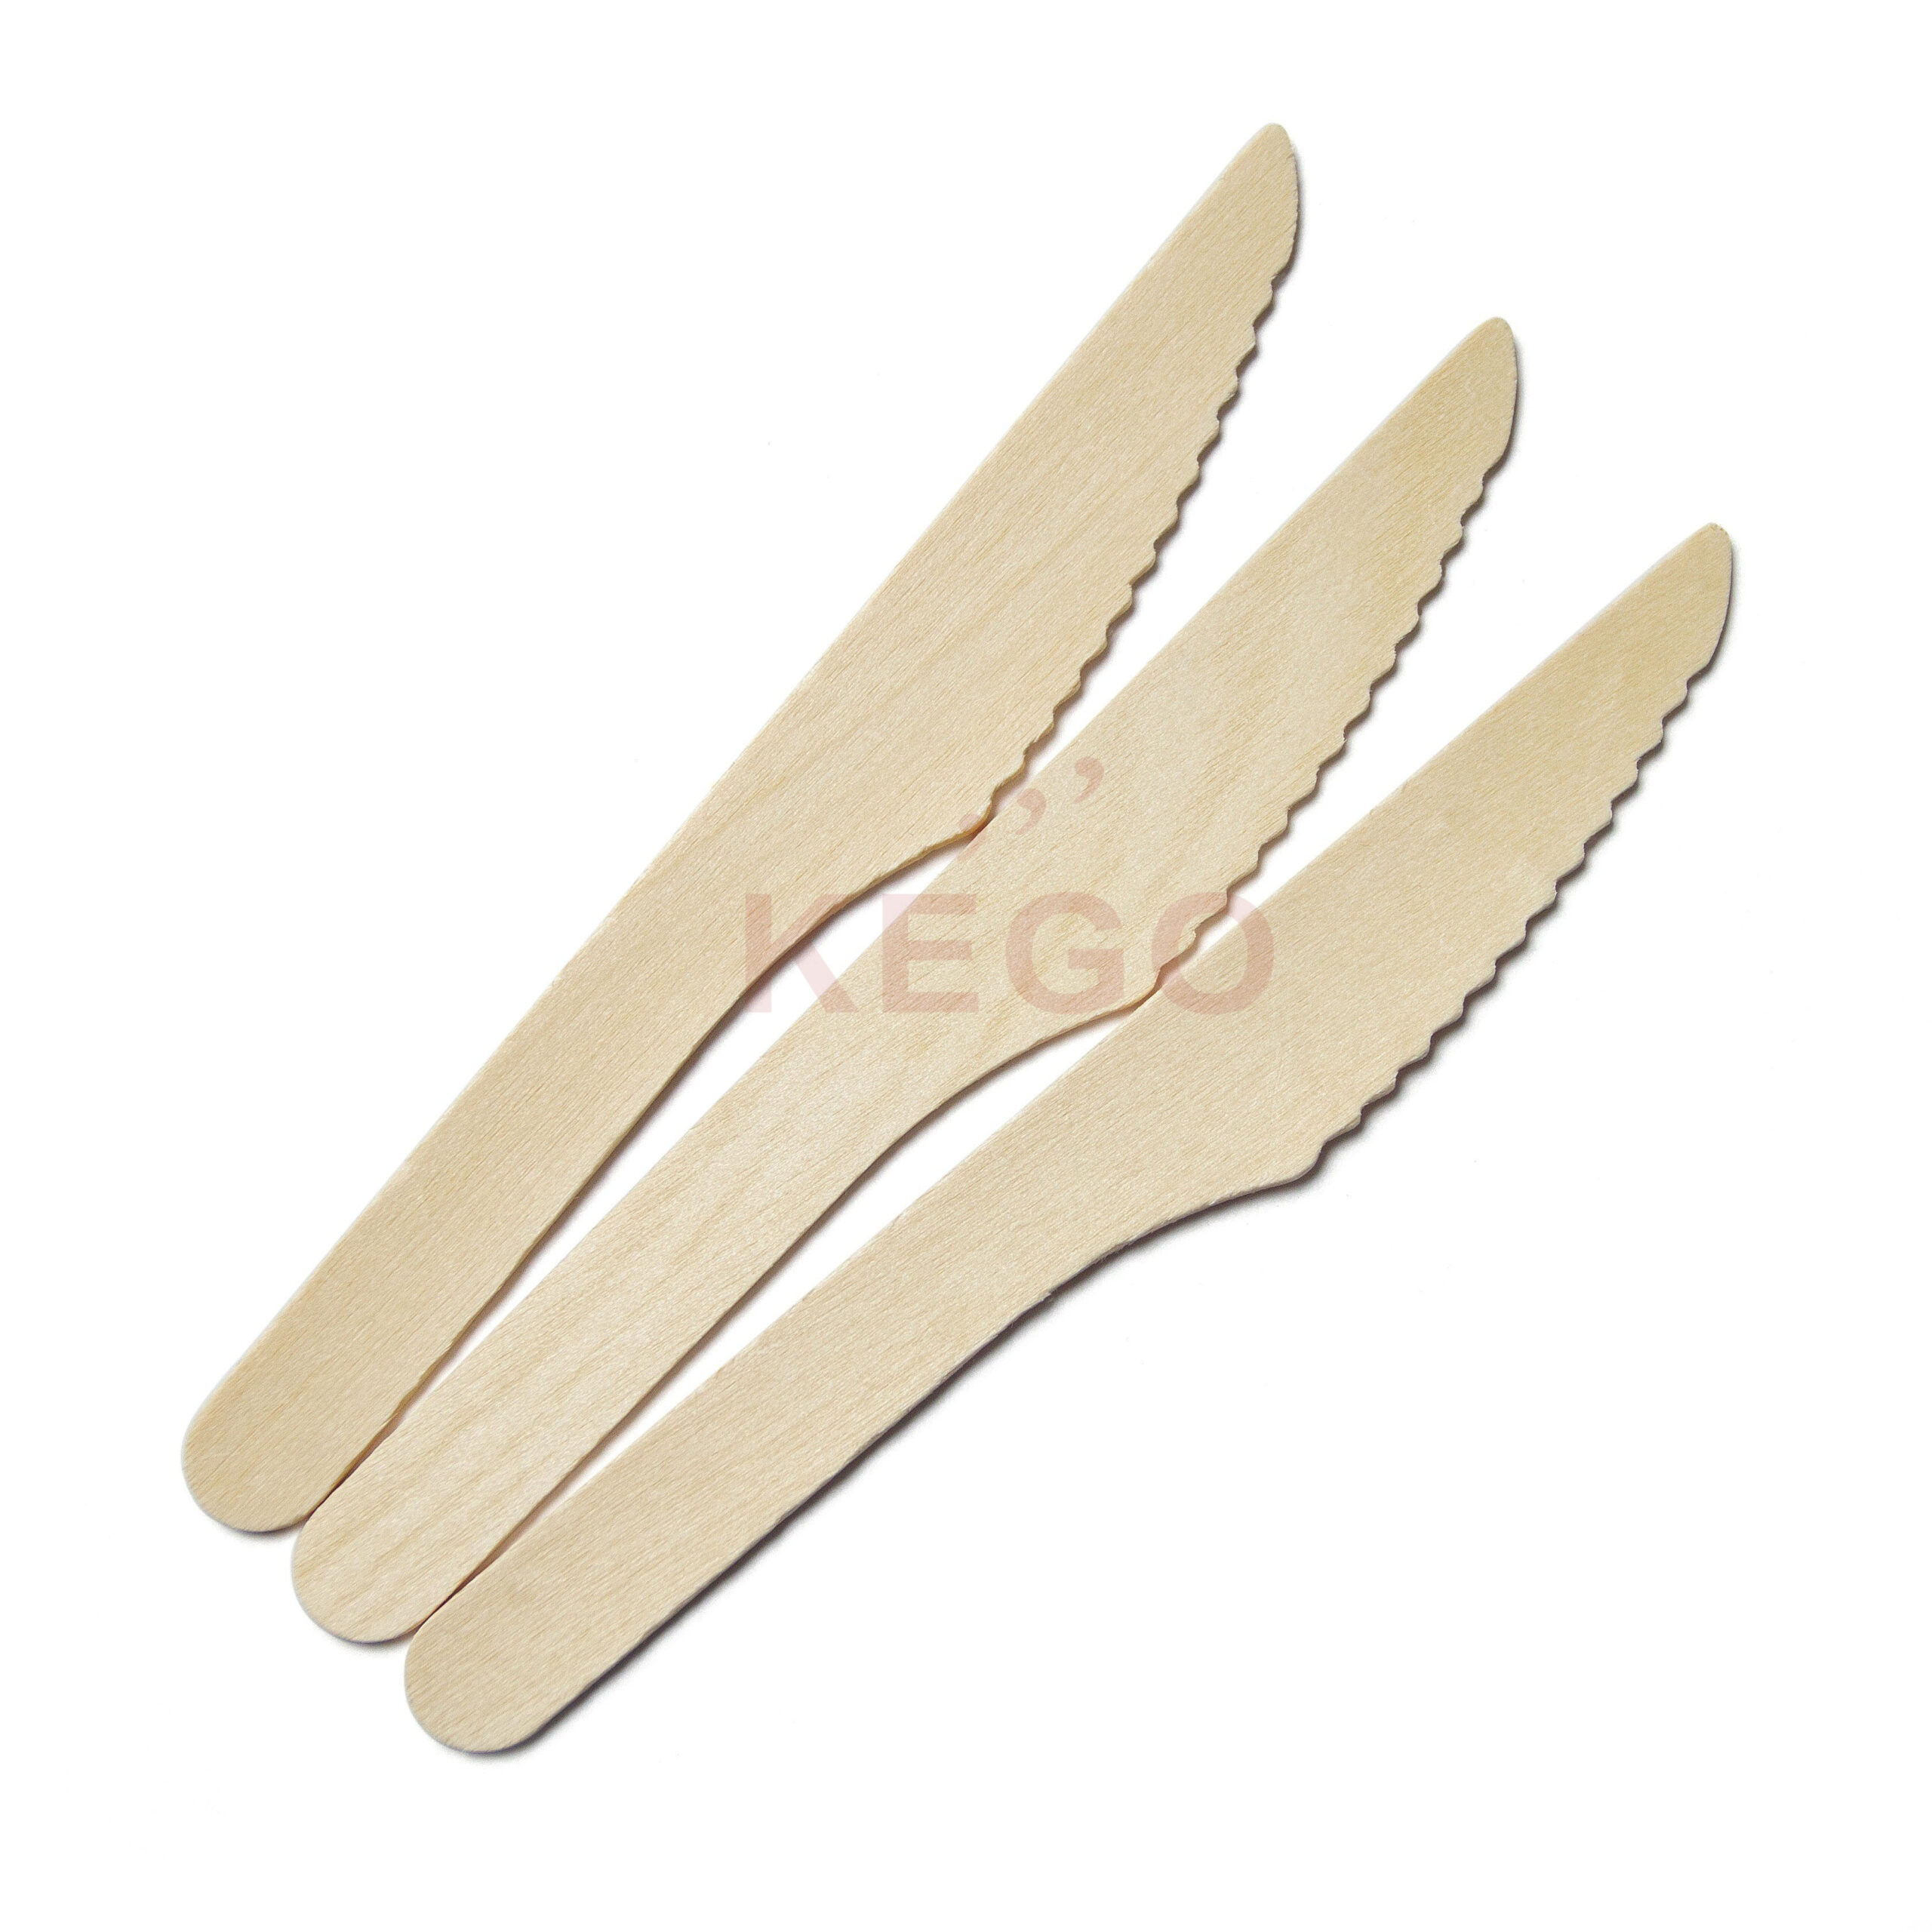 https://disposablewoodencutlery.com/wp-content/uploads/2015/09/Disposable-Wooden-Knife-165-3-scaled.jpg